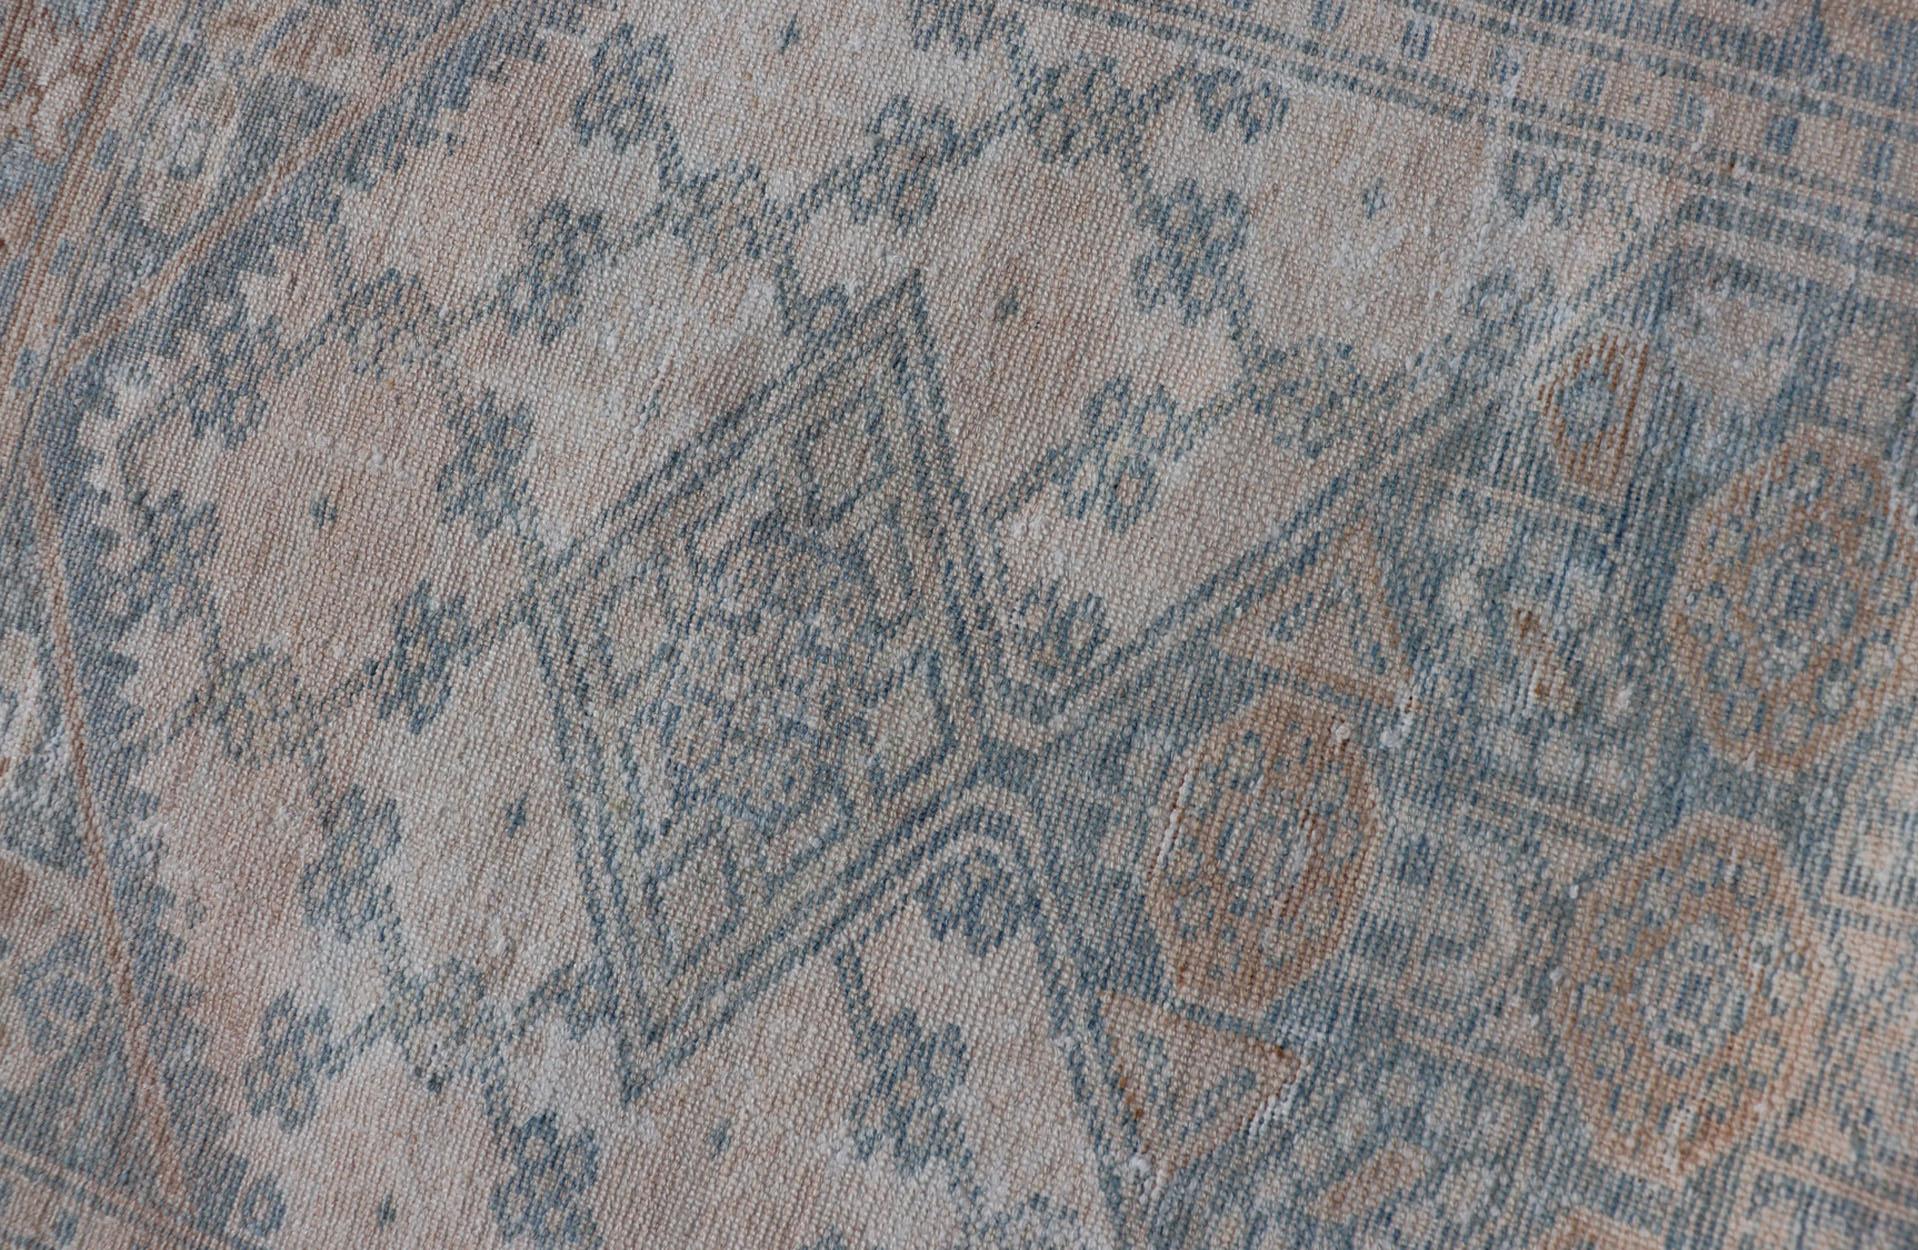 Antique Persian Sarab Runner with Sub-Geometric Design in Light Blue, Tan, Grey For Sale 5